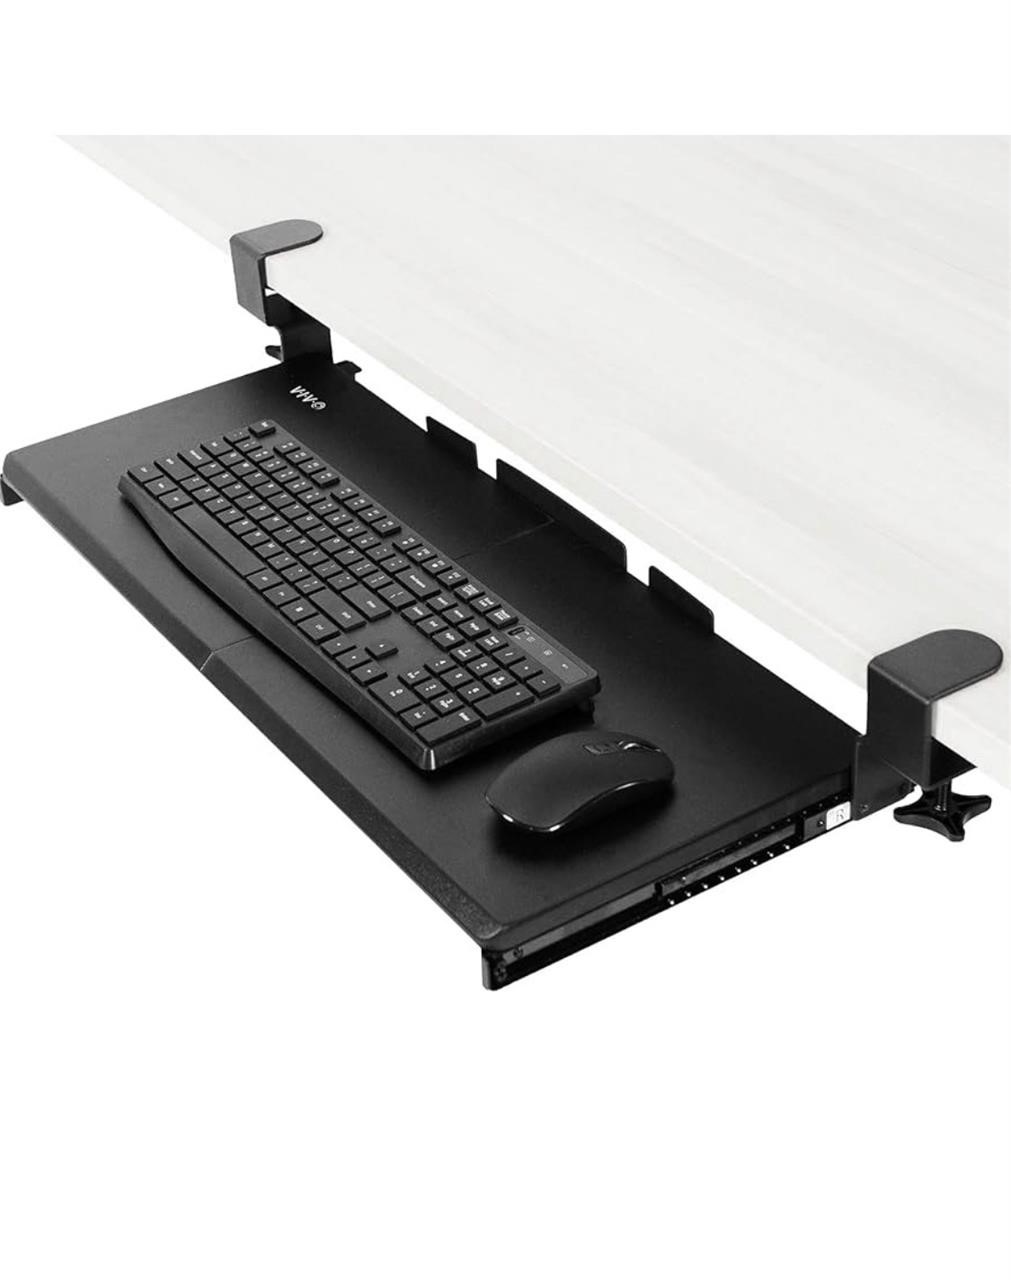 VIVO Large Keyboard Tray Under Desk Pull Out